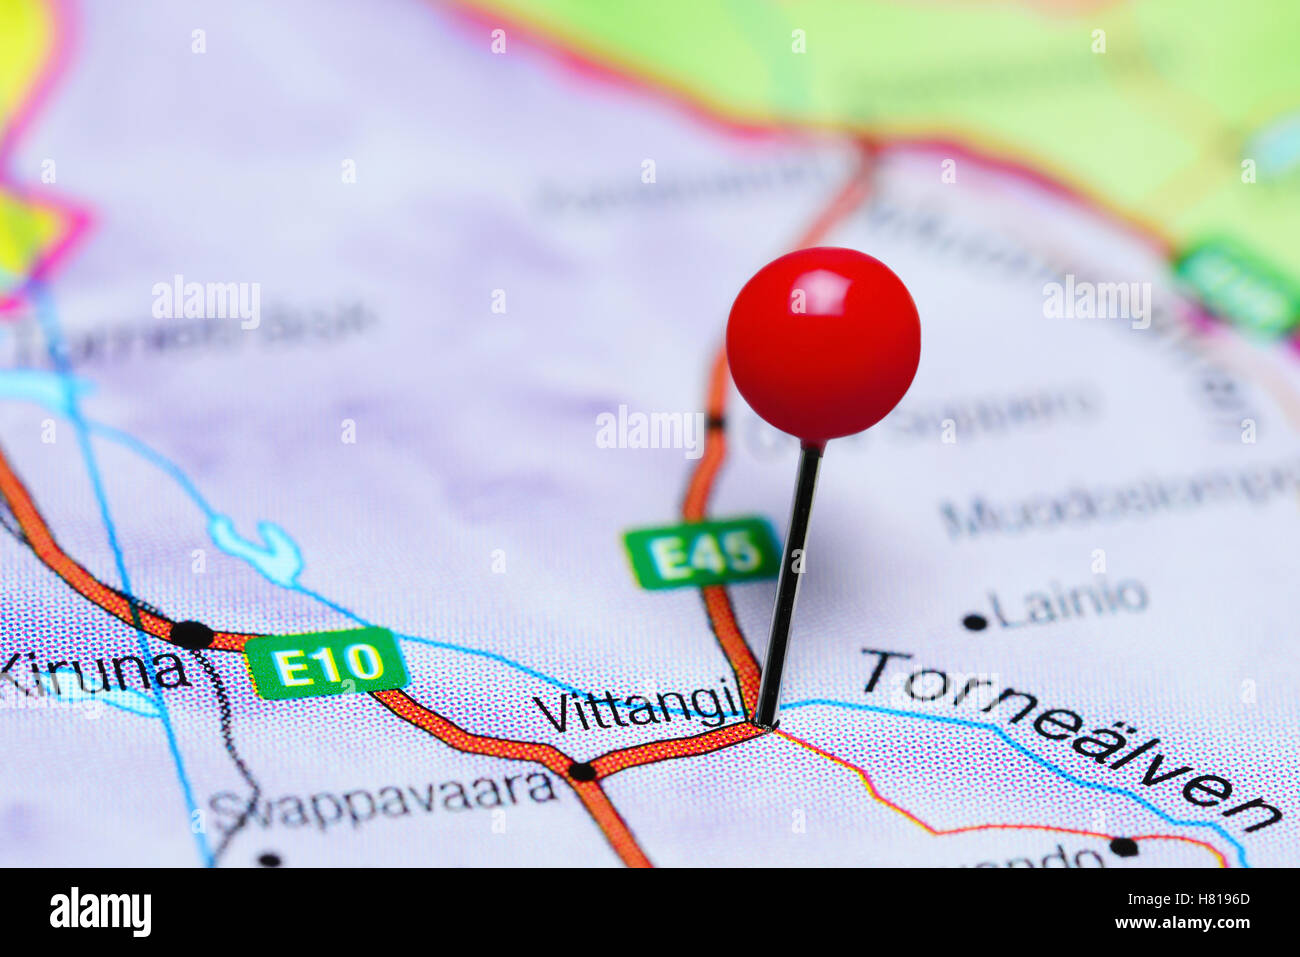 Vittangi pinned on a map of Sweden Stock Photo